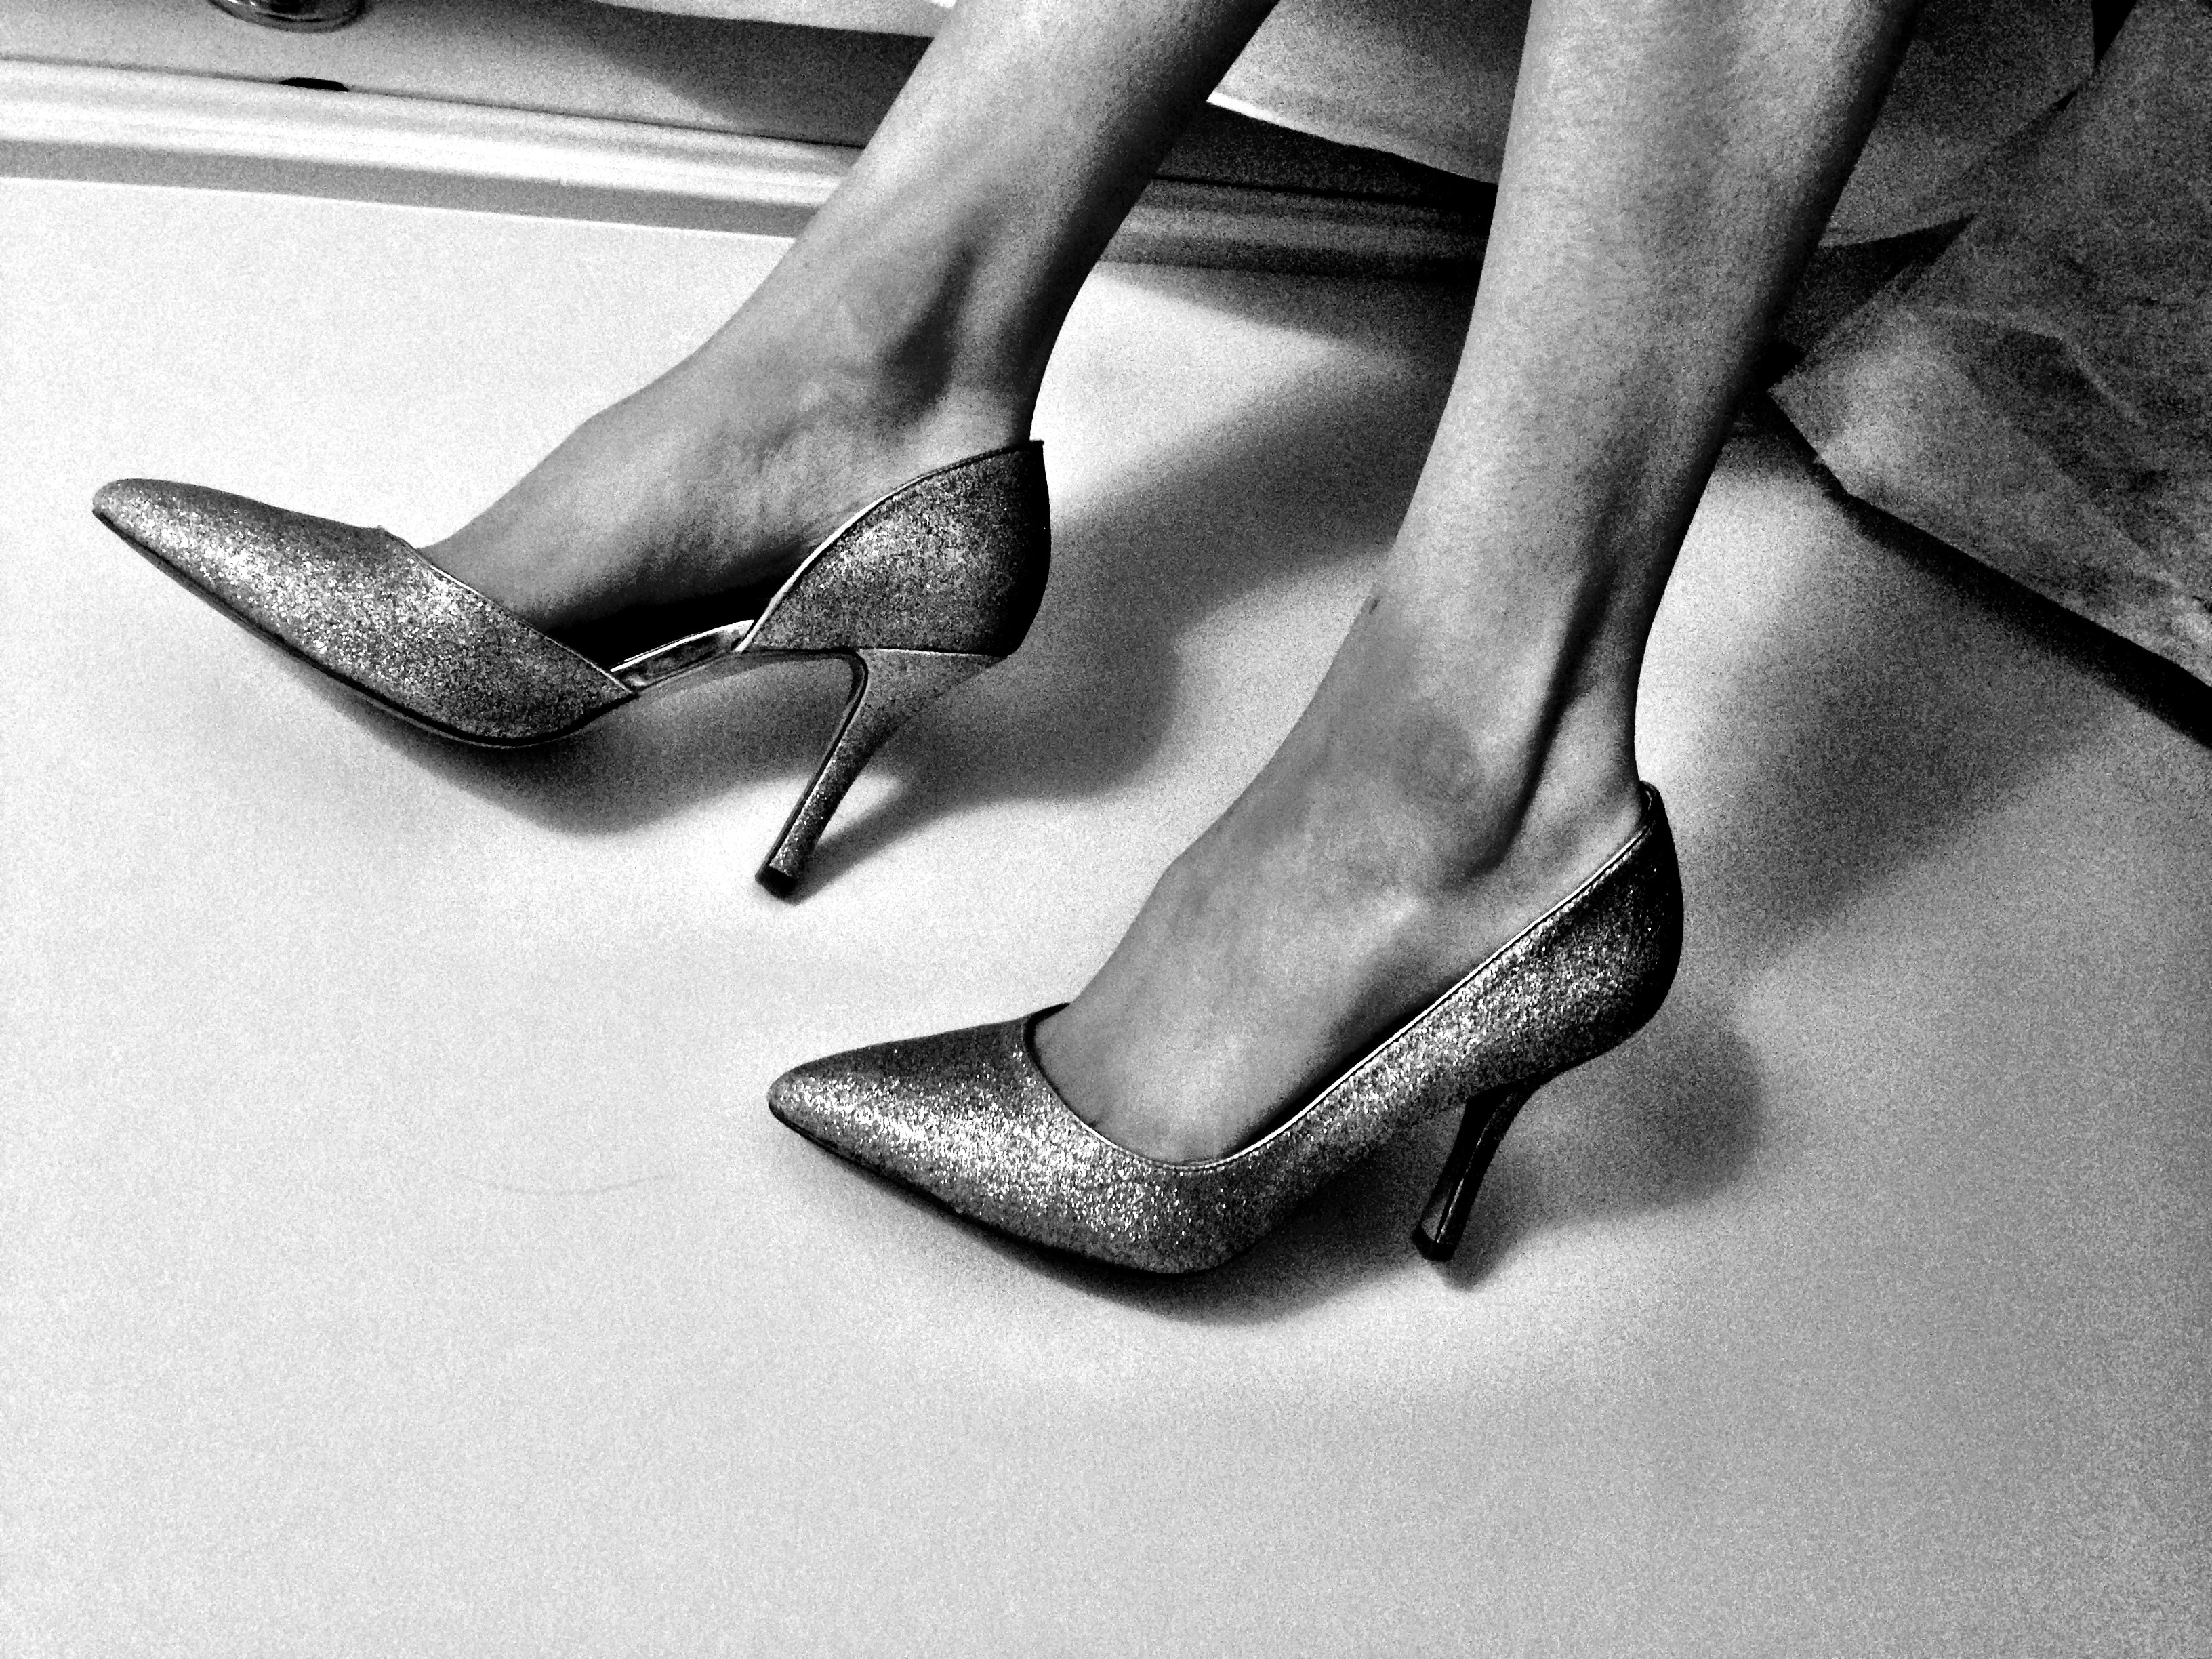 grayscale photo of person in d'orsay platform heels